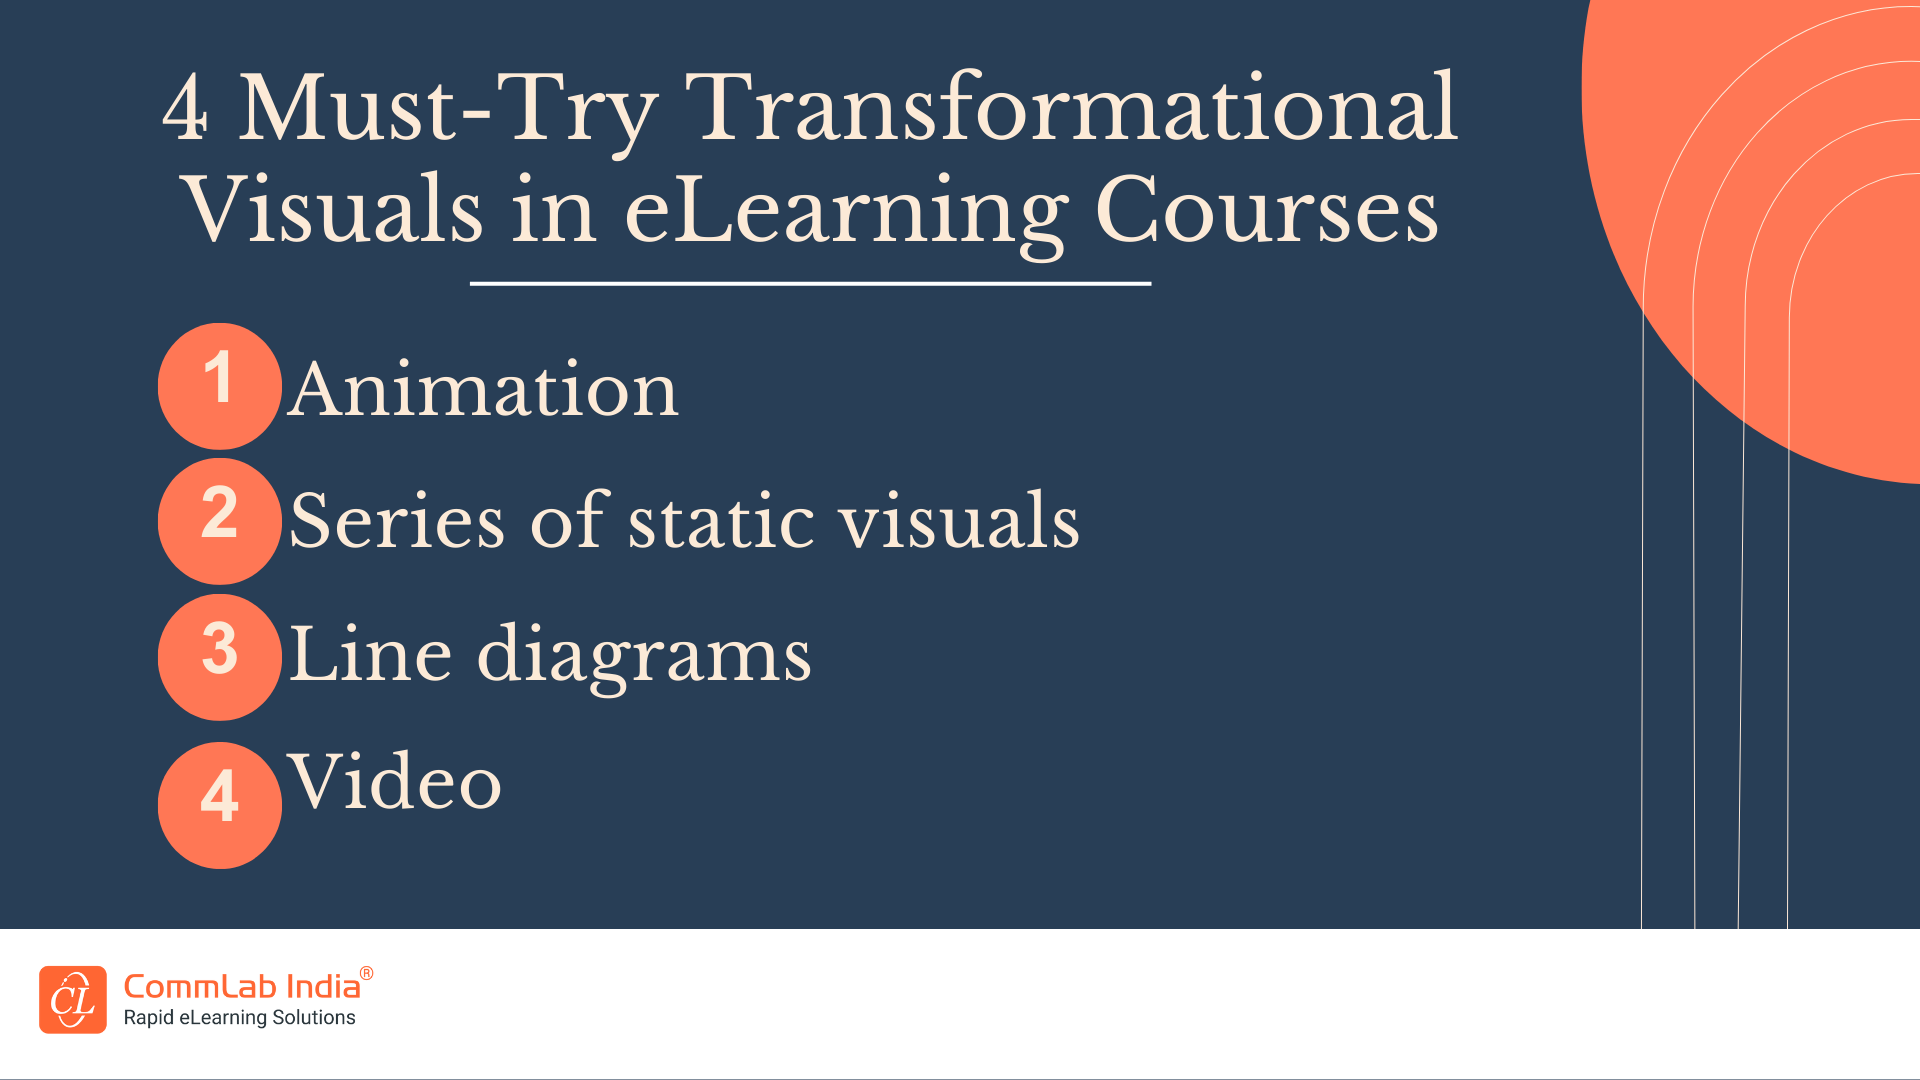 4 Must-Try Transformational Visuals in eLearning Courses